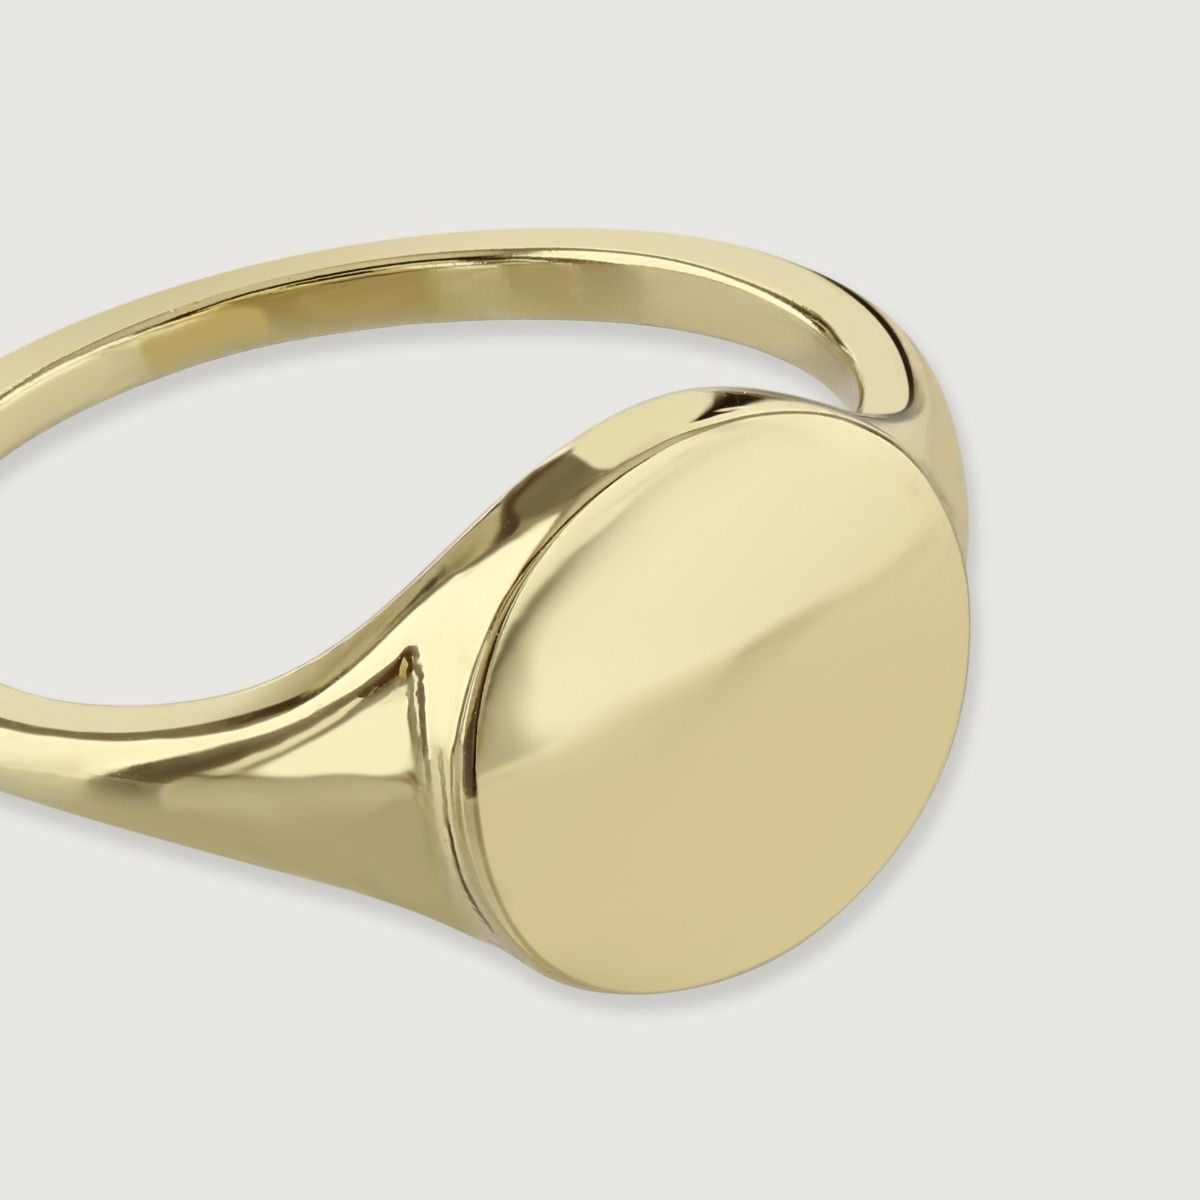 The Round Design Gold Signet Ring is a timeless and elegant piece of jewellery. Crafted with precision, this ring features a classic round design on the signet. Made from luxurious gold, it exudes sophistication and style, making it a perfect accessory to